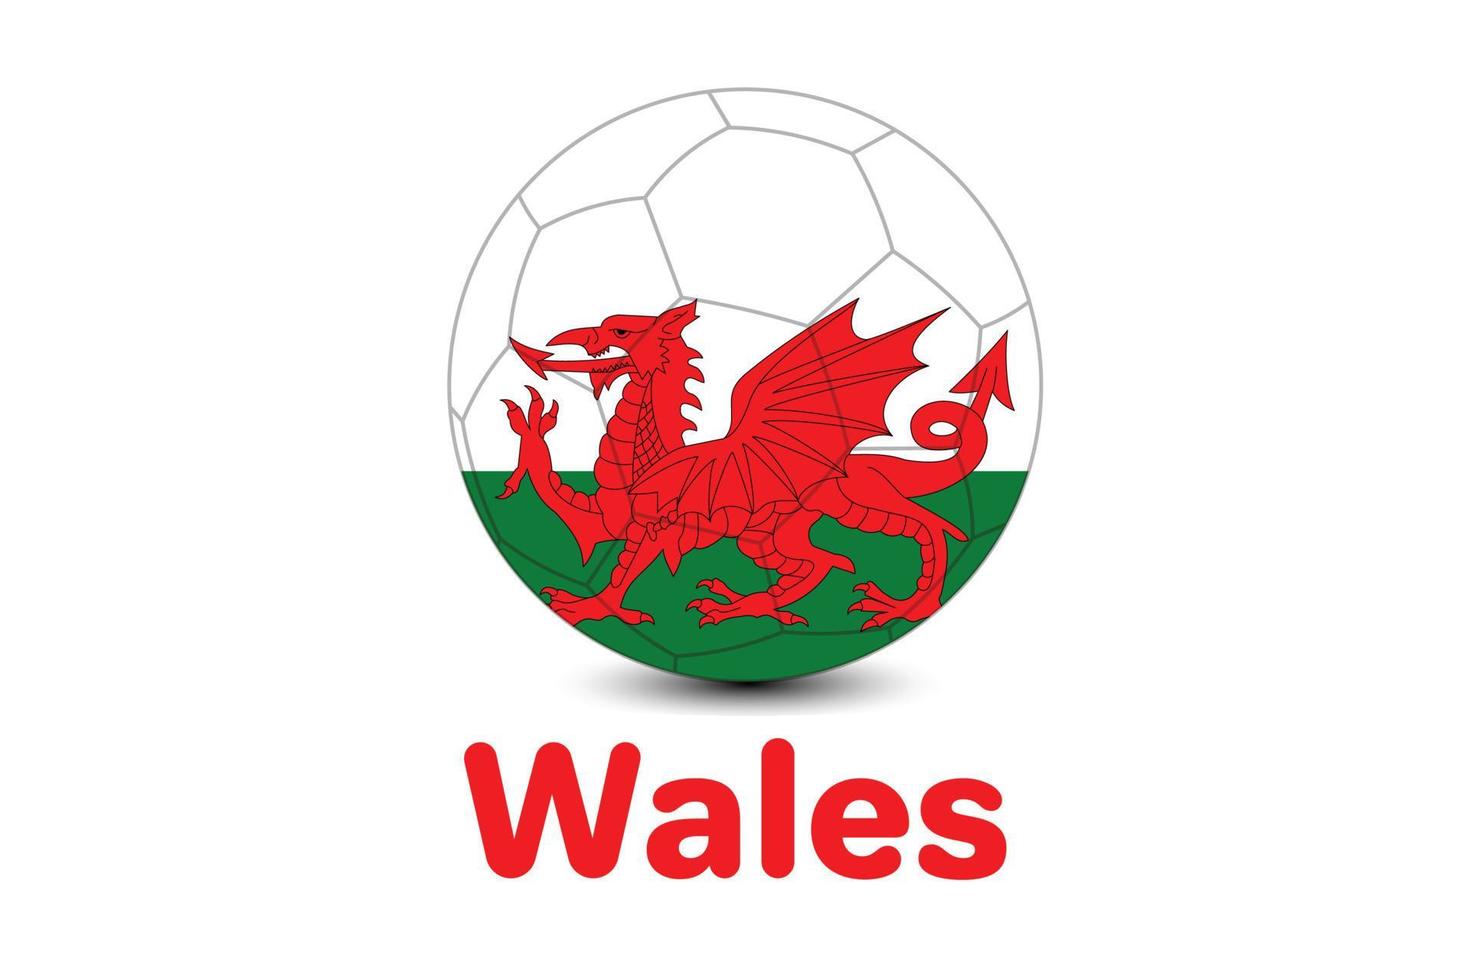 Wales Flag For Fifa Worldcup 2022. qatar world cup football illustration. vector